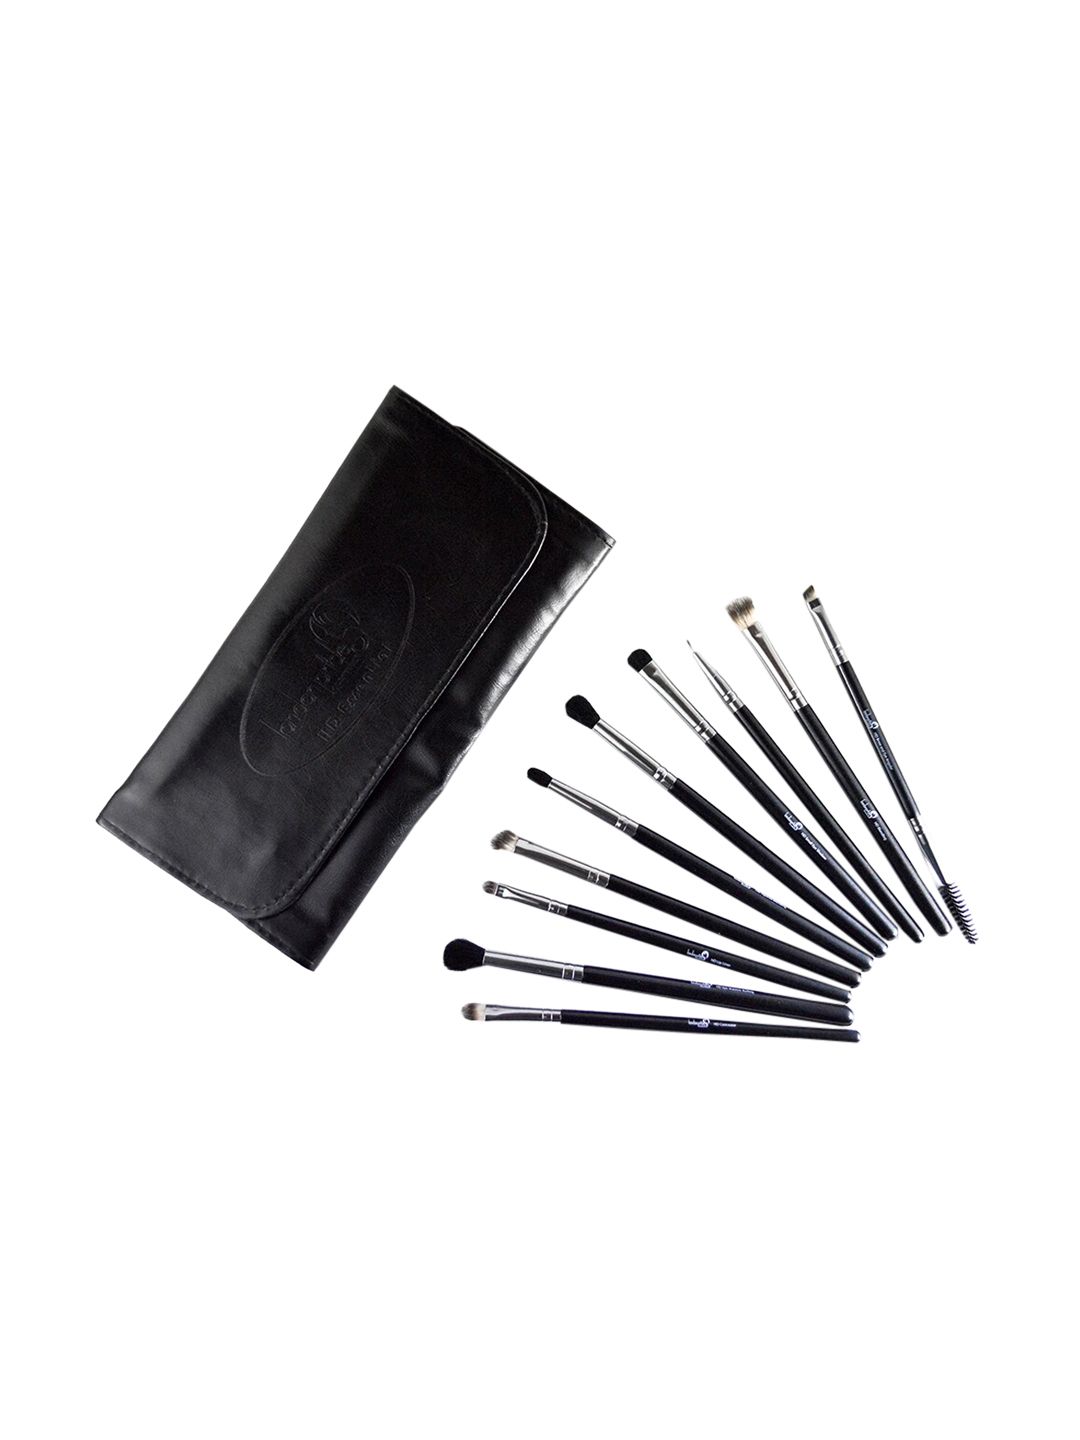 london pride cosmetics Set of 10 HD Eye Makeup Essential Brushes Price in India